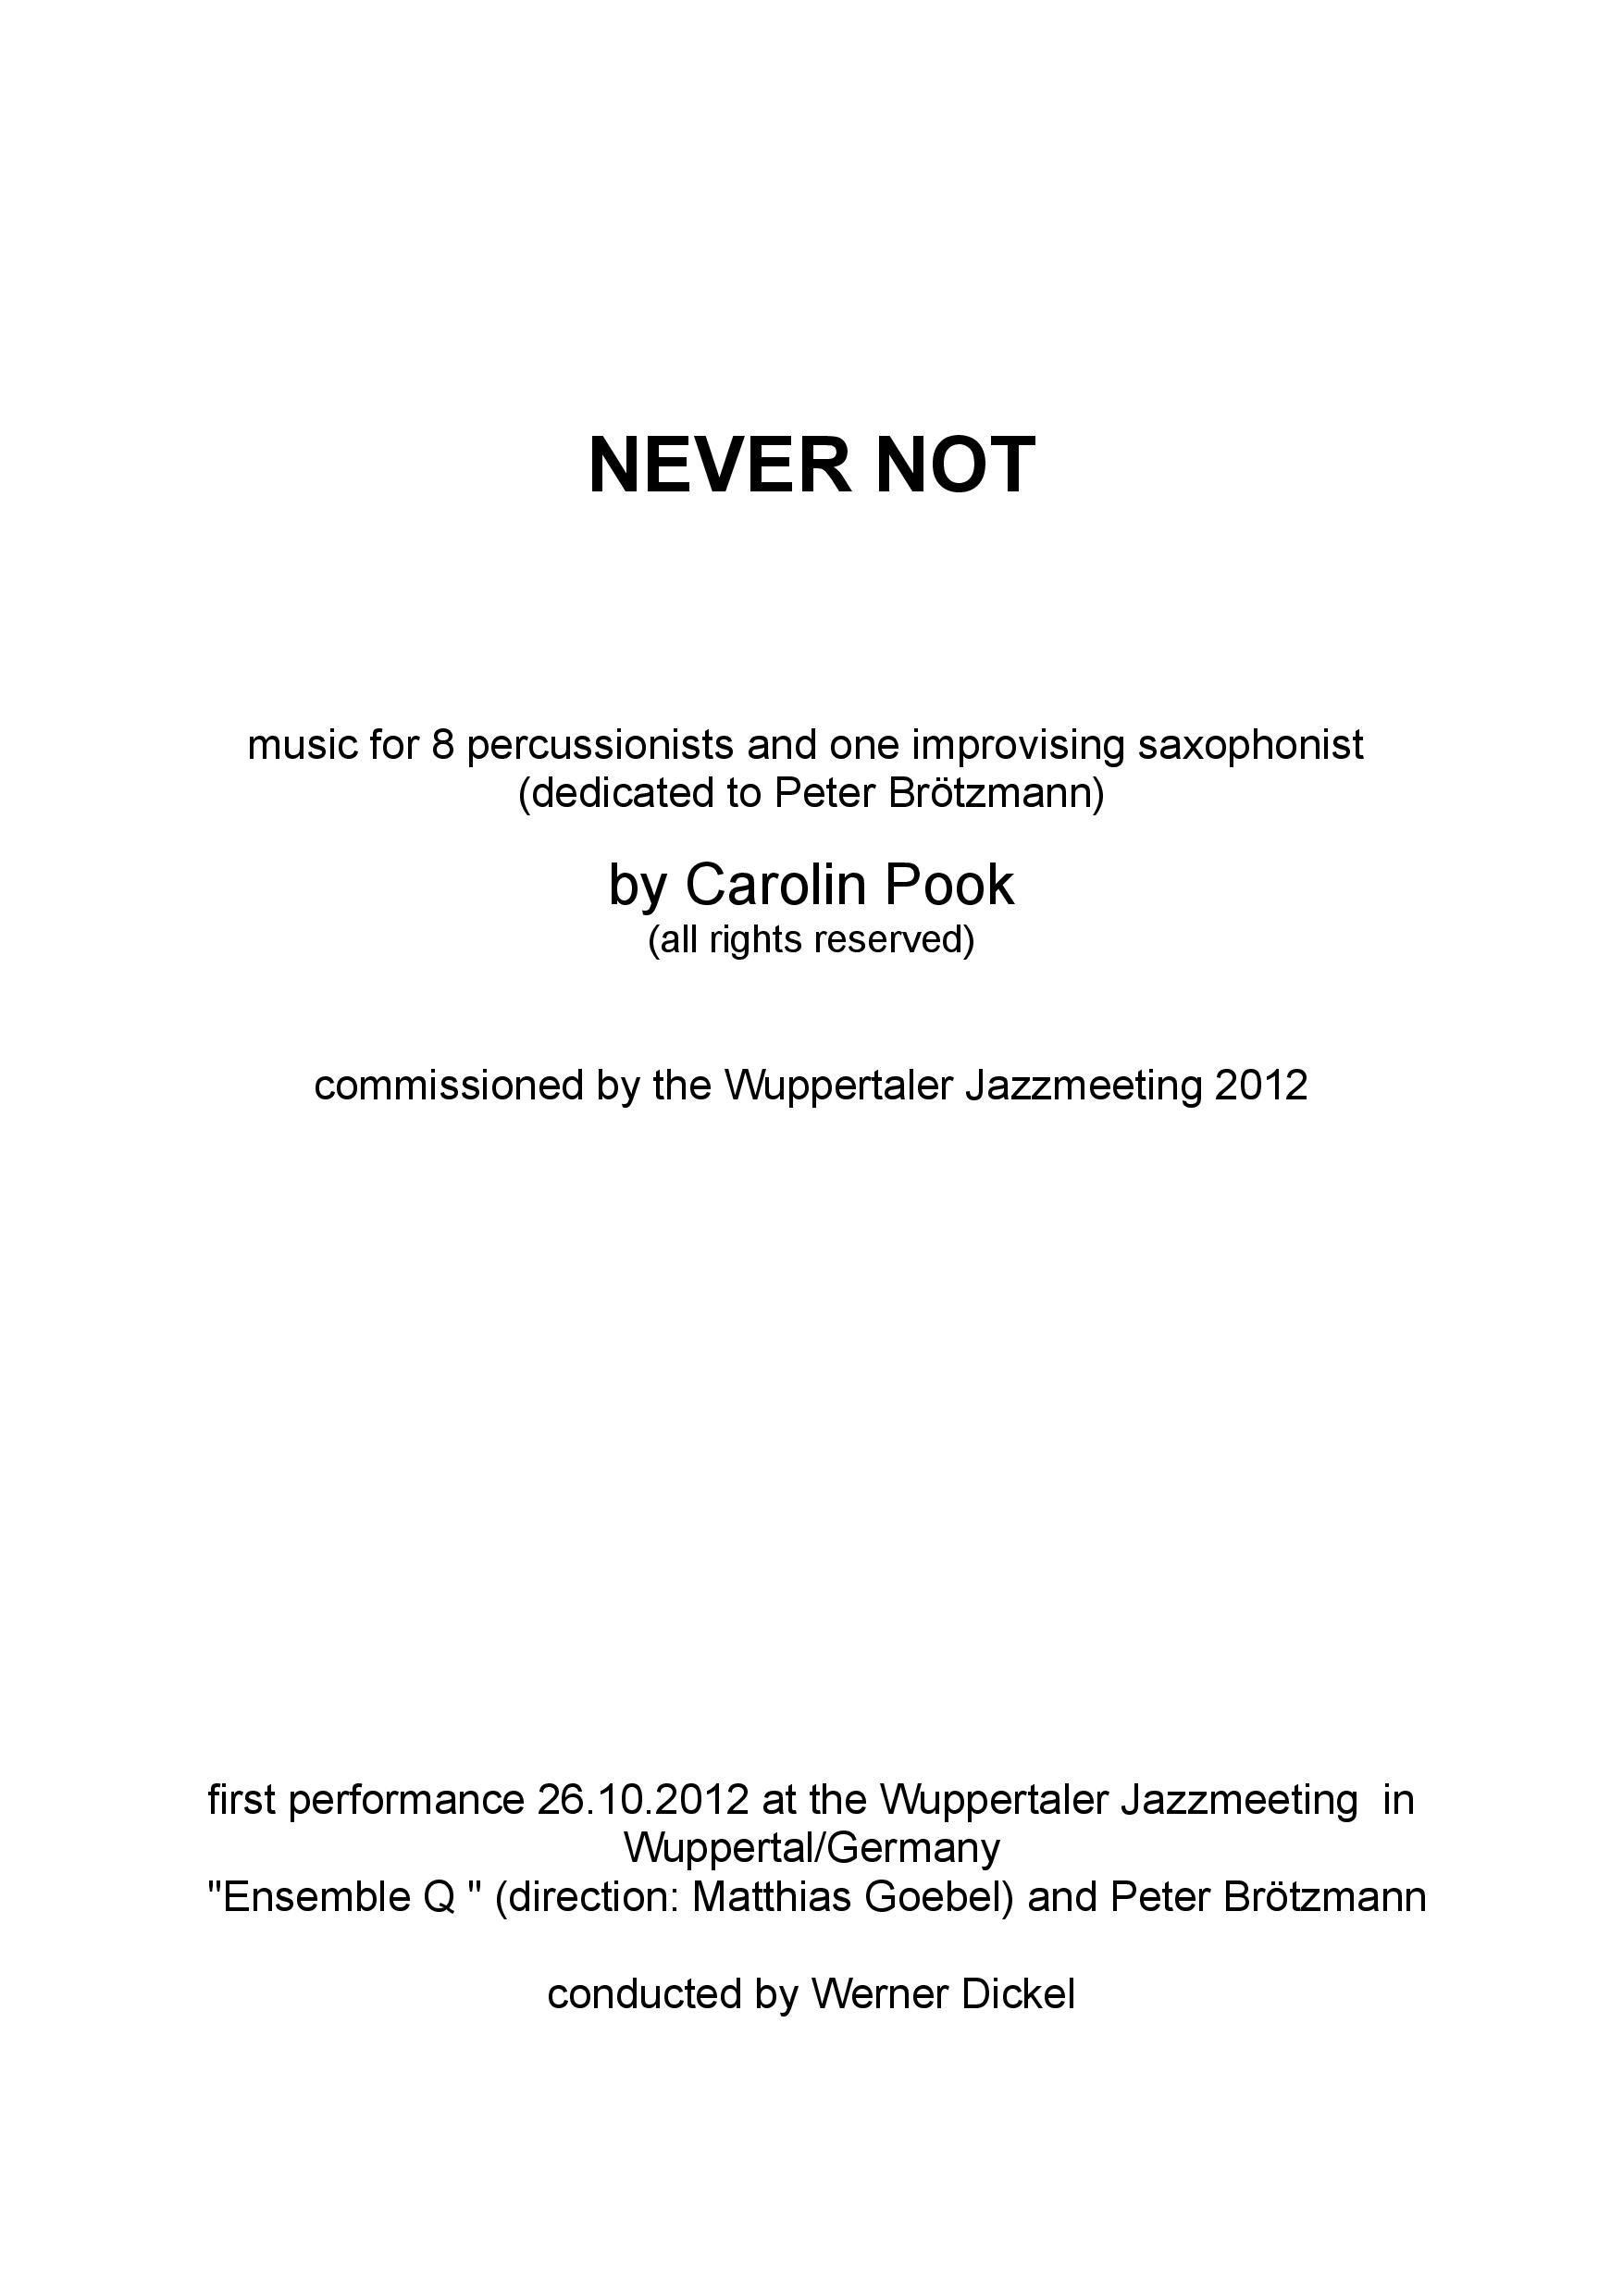 NEVER NOT - Partitur A3-page-001.jpg